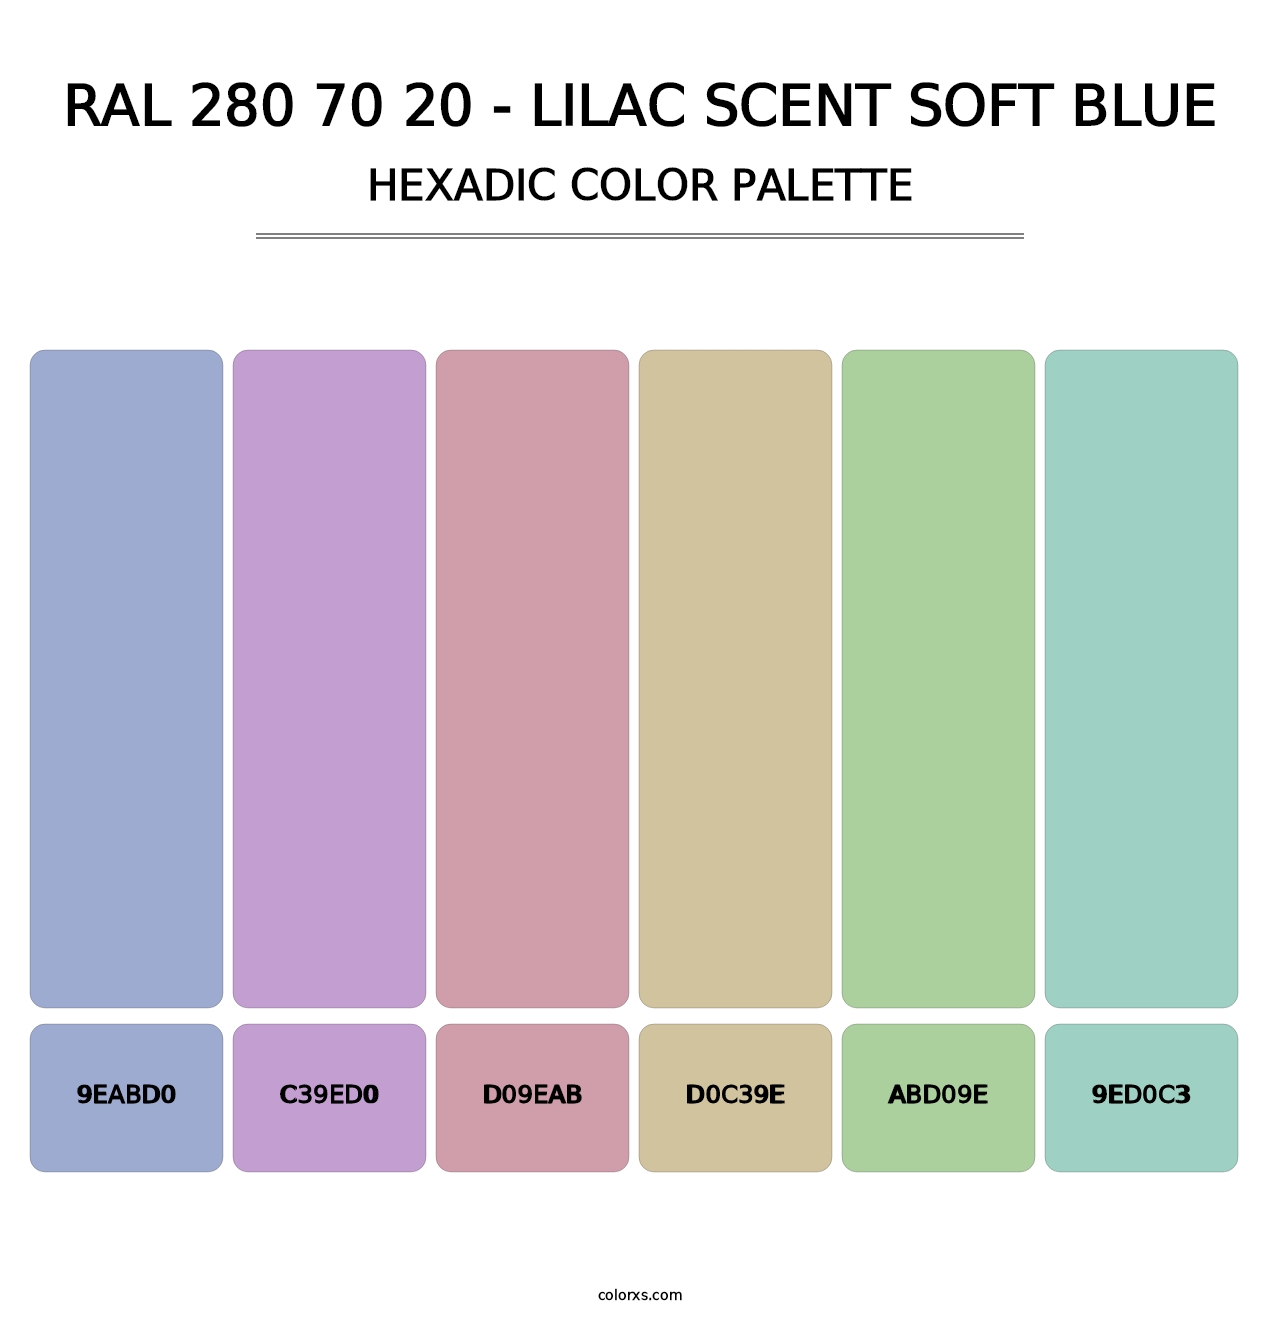 RAL 280 70 20 - Lilac Scent Soft Blue - Hexadic Color Palette